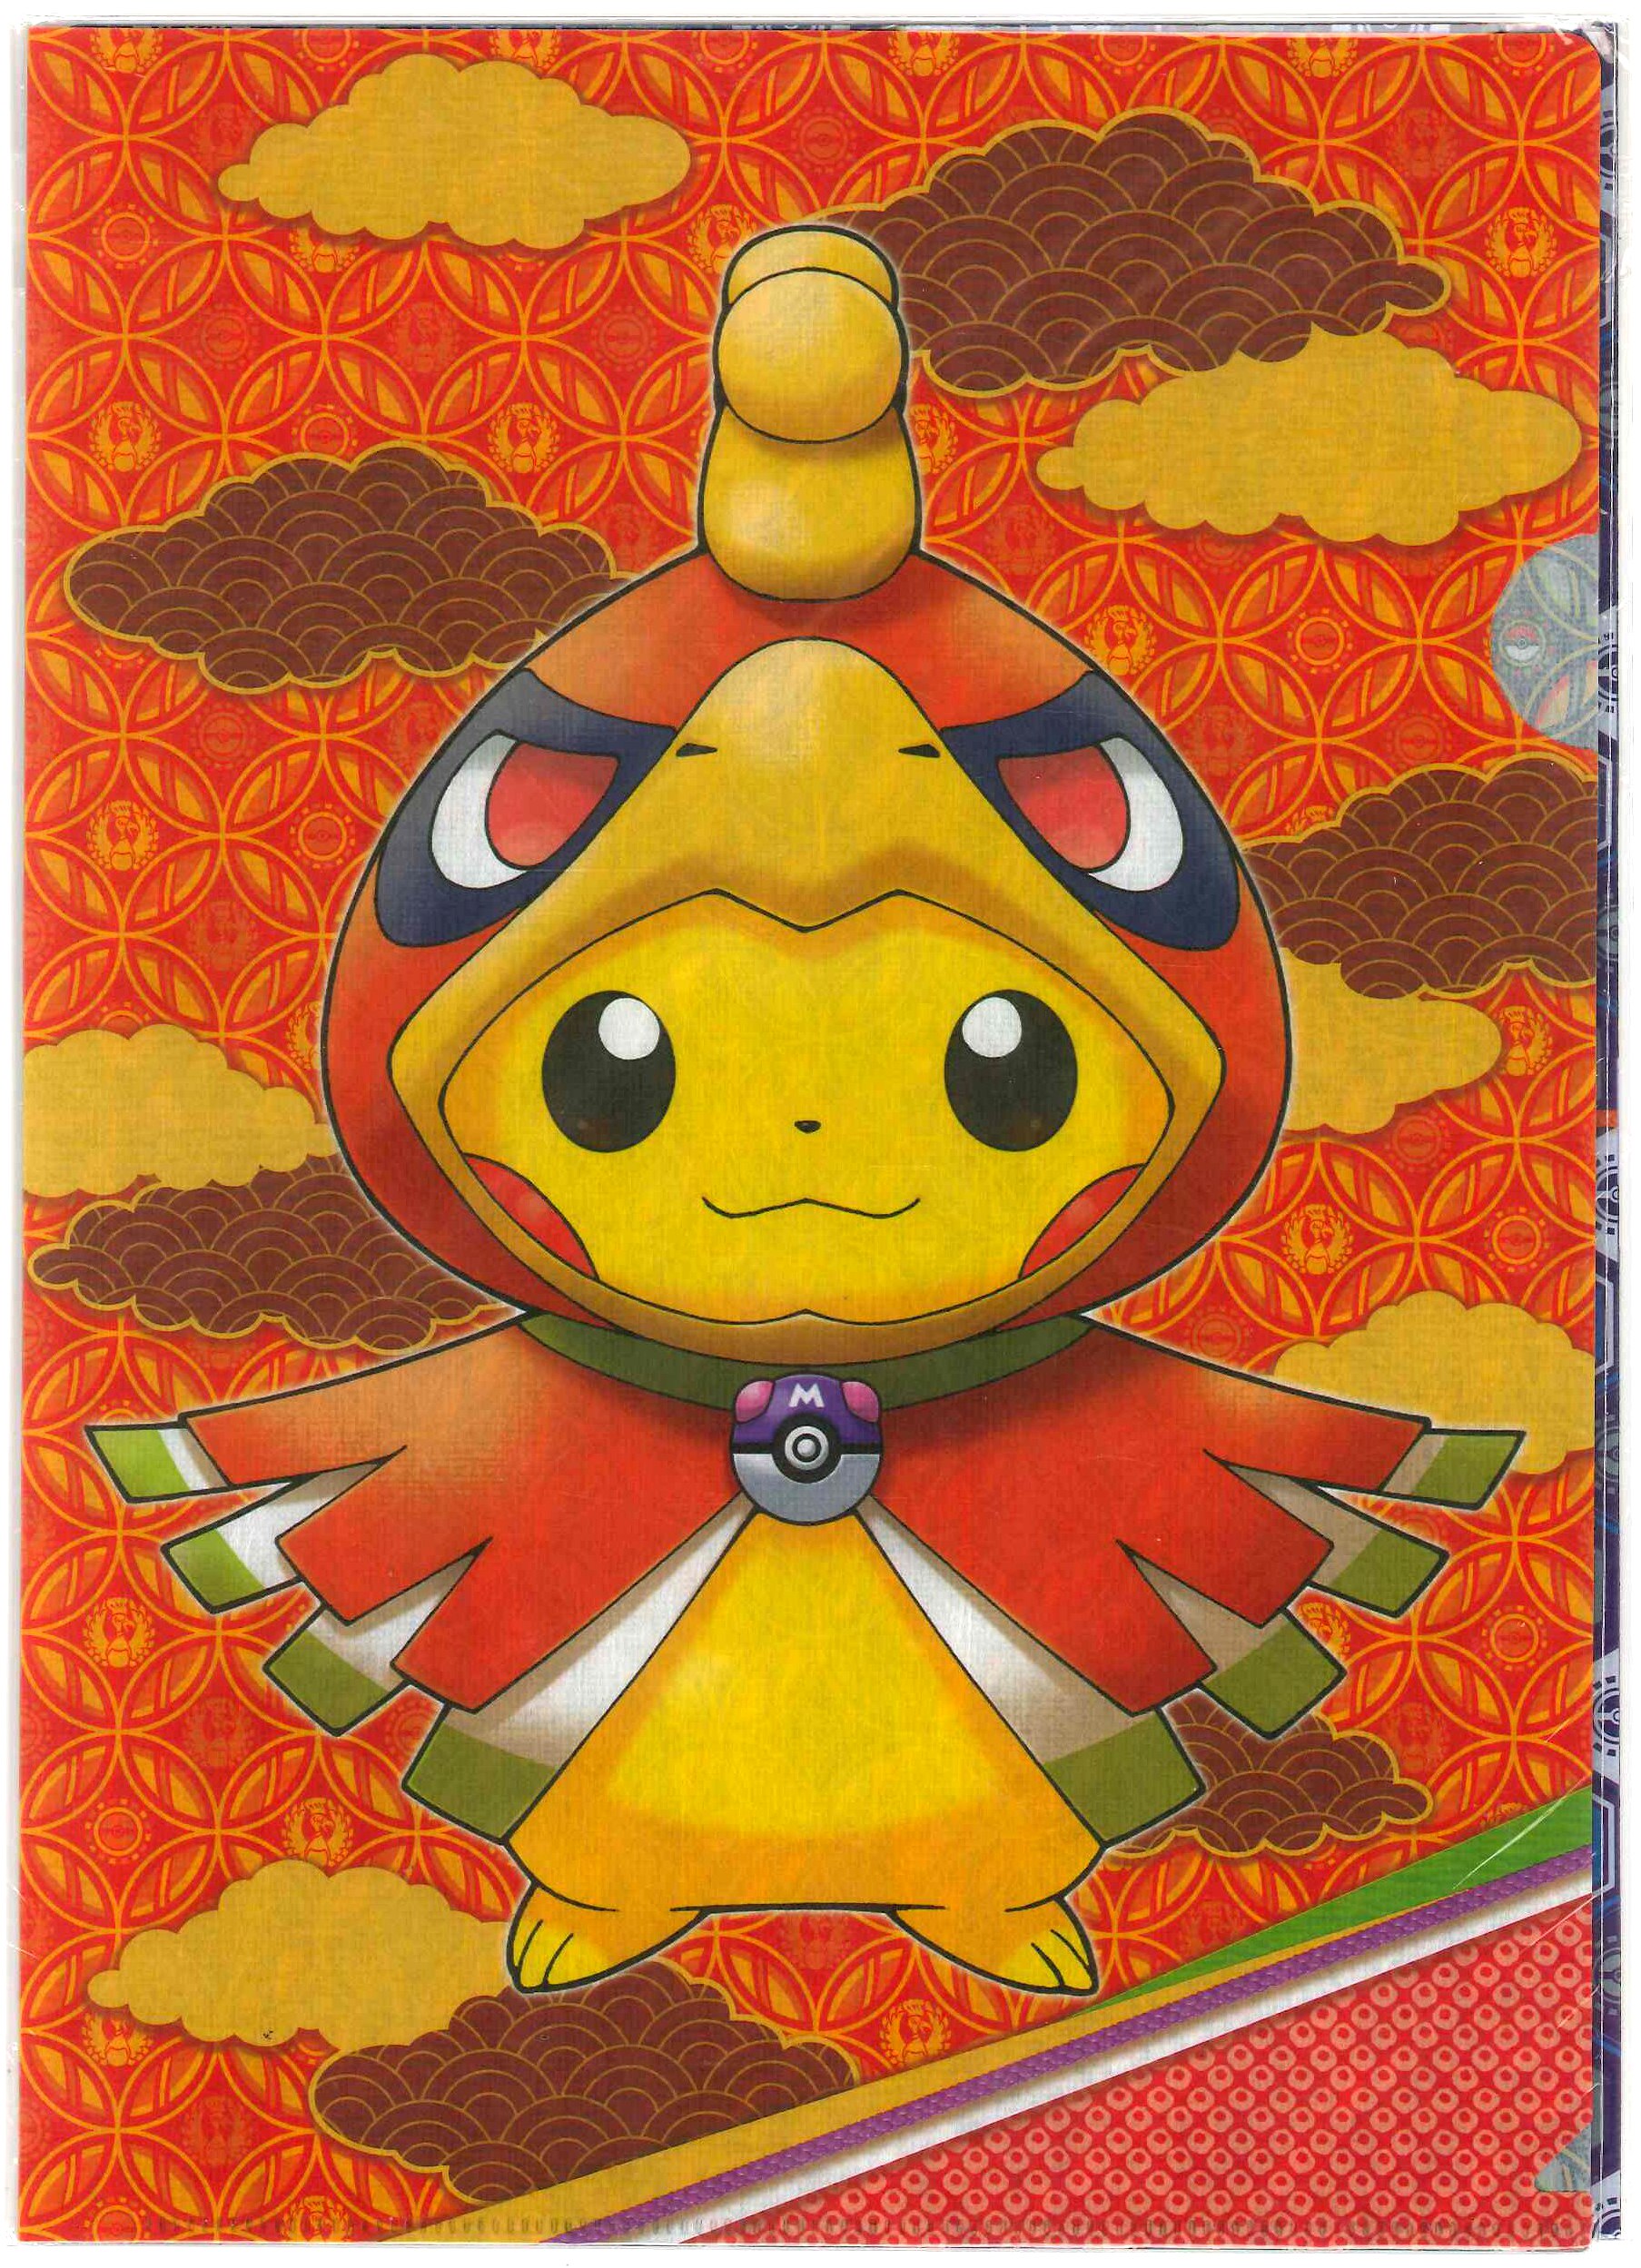 Pokemon Center Kyoto 2016 Grand Opening Campaign #2 Poncho Pikachu Lugia  Ho-oh Set of 2 A4 Size Clear File Folders